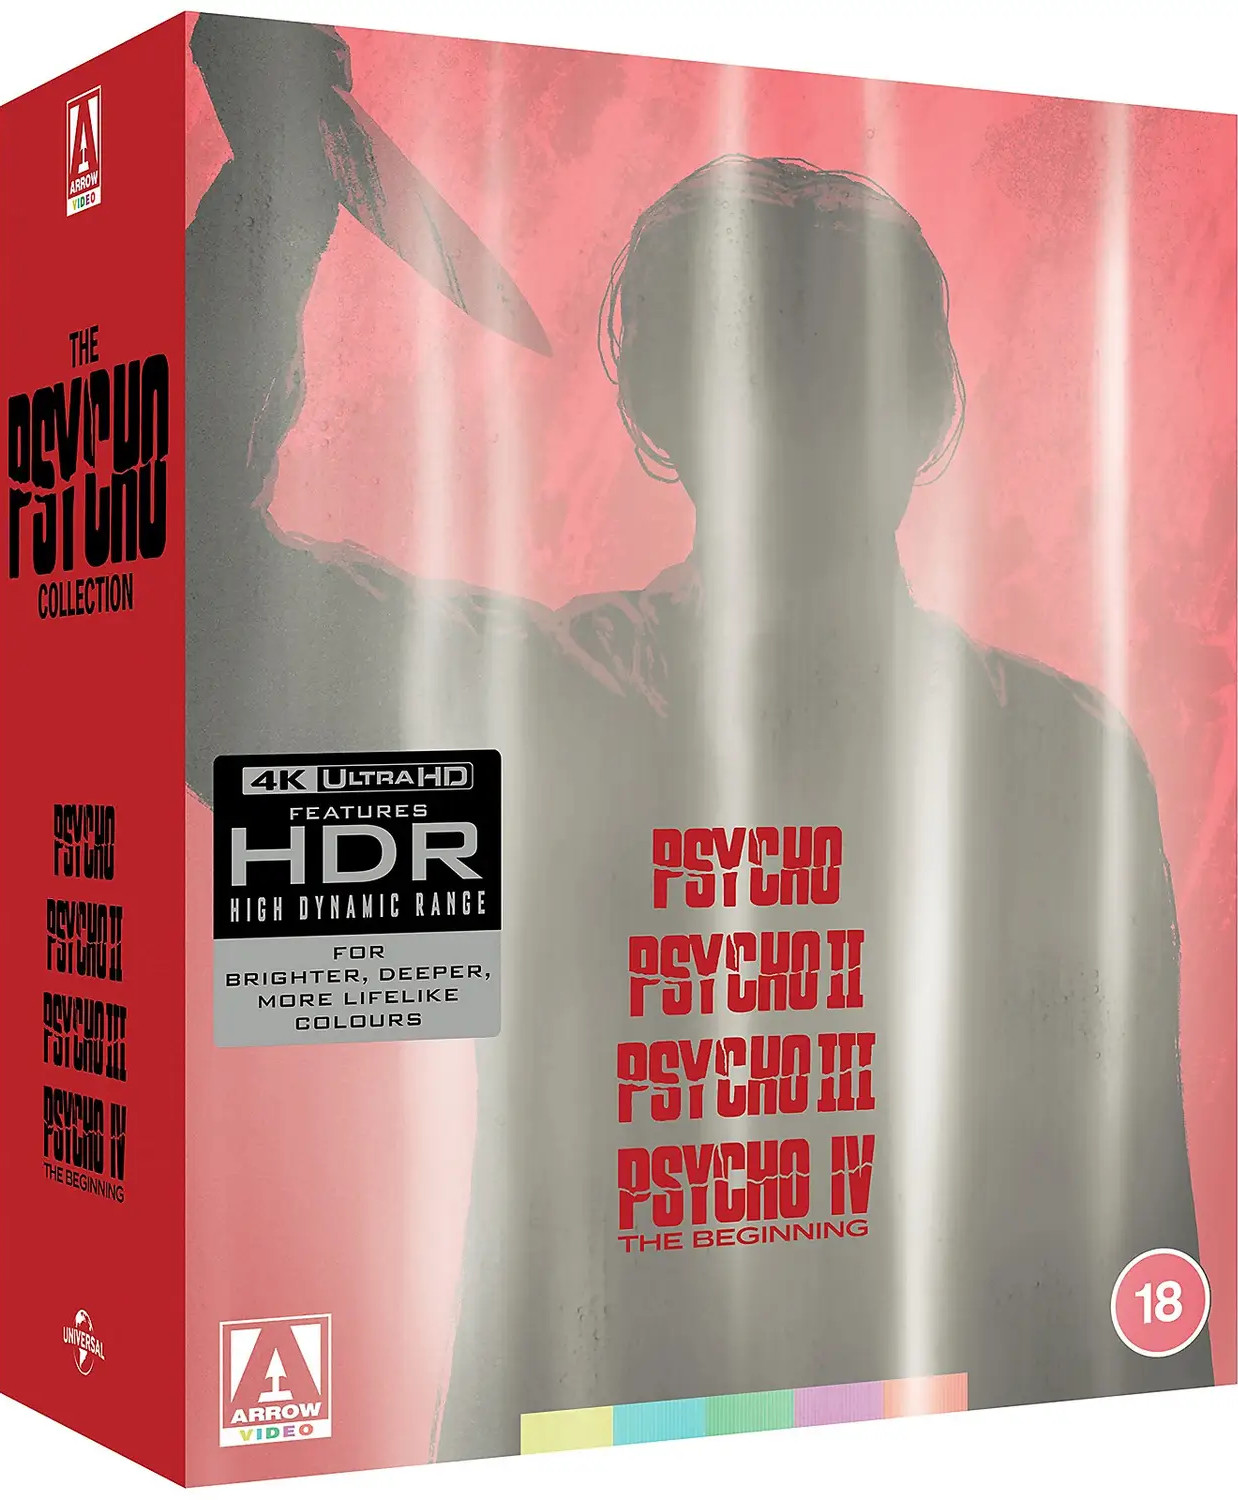 The Psycho collection